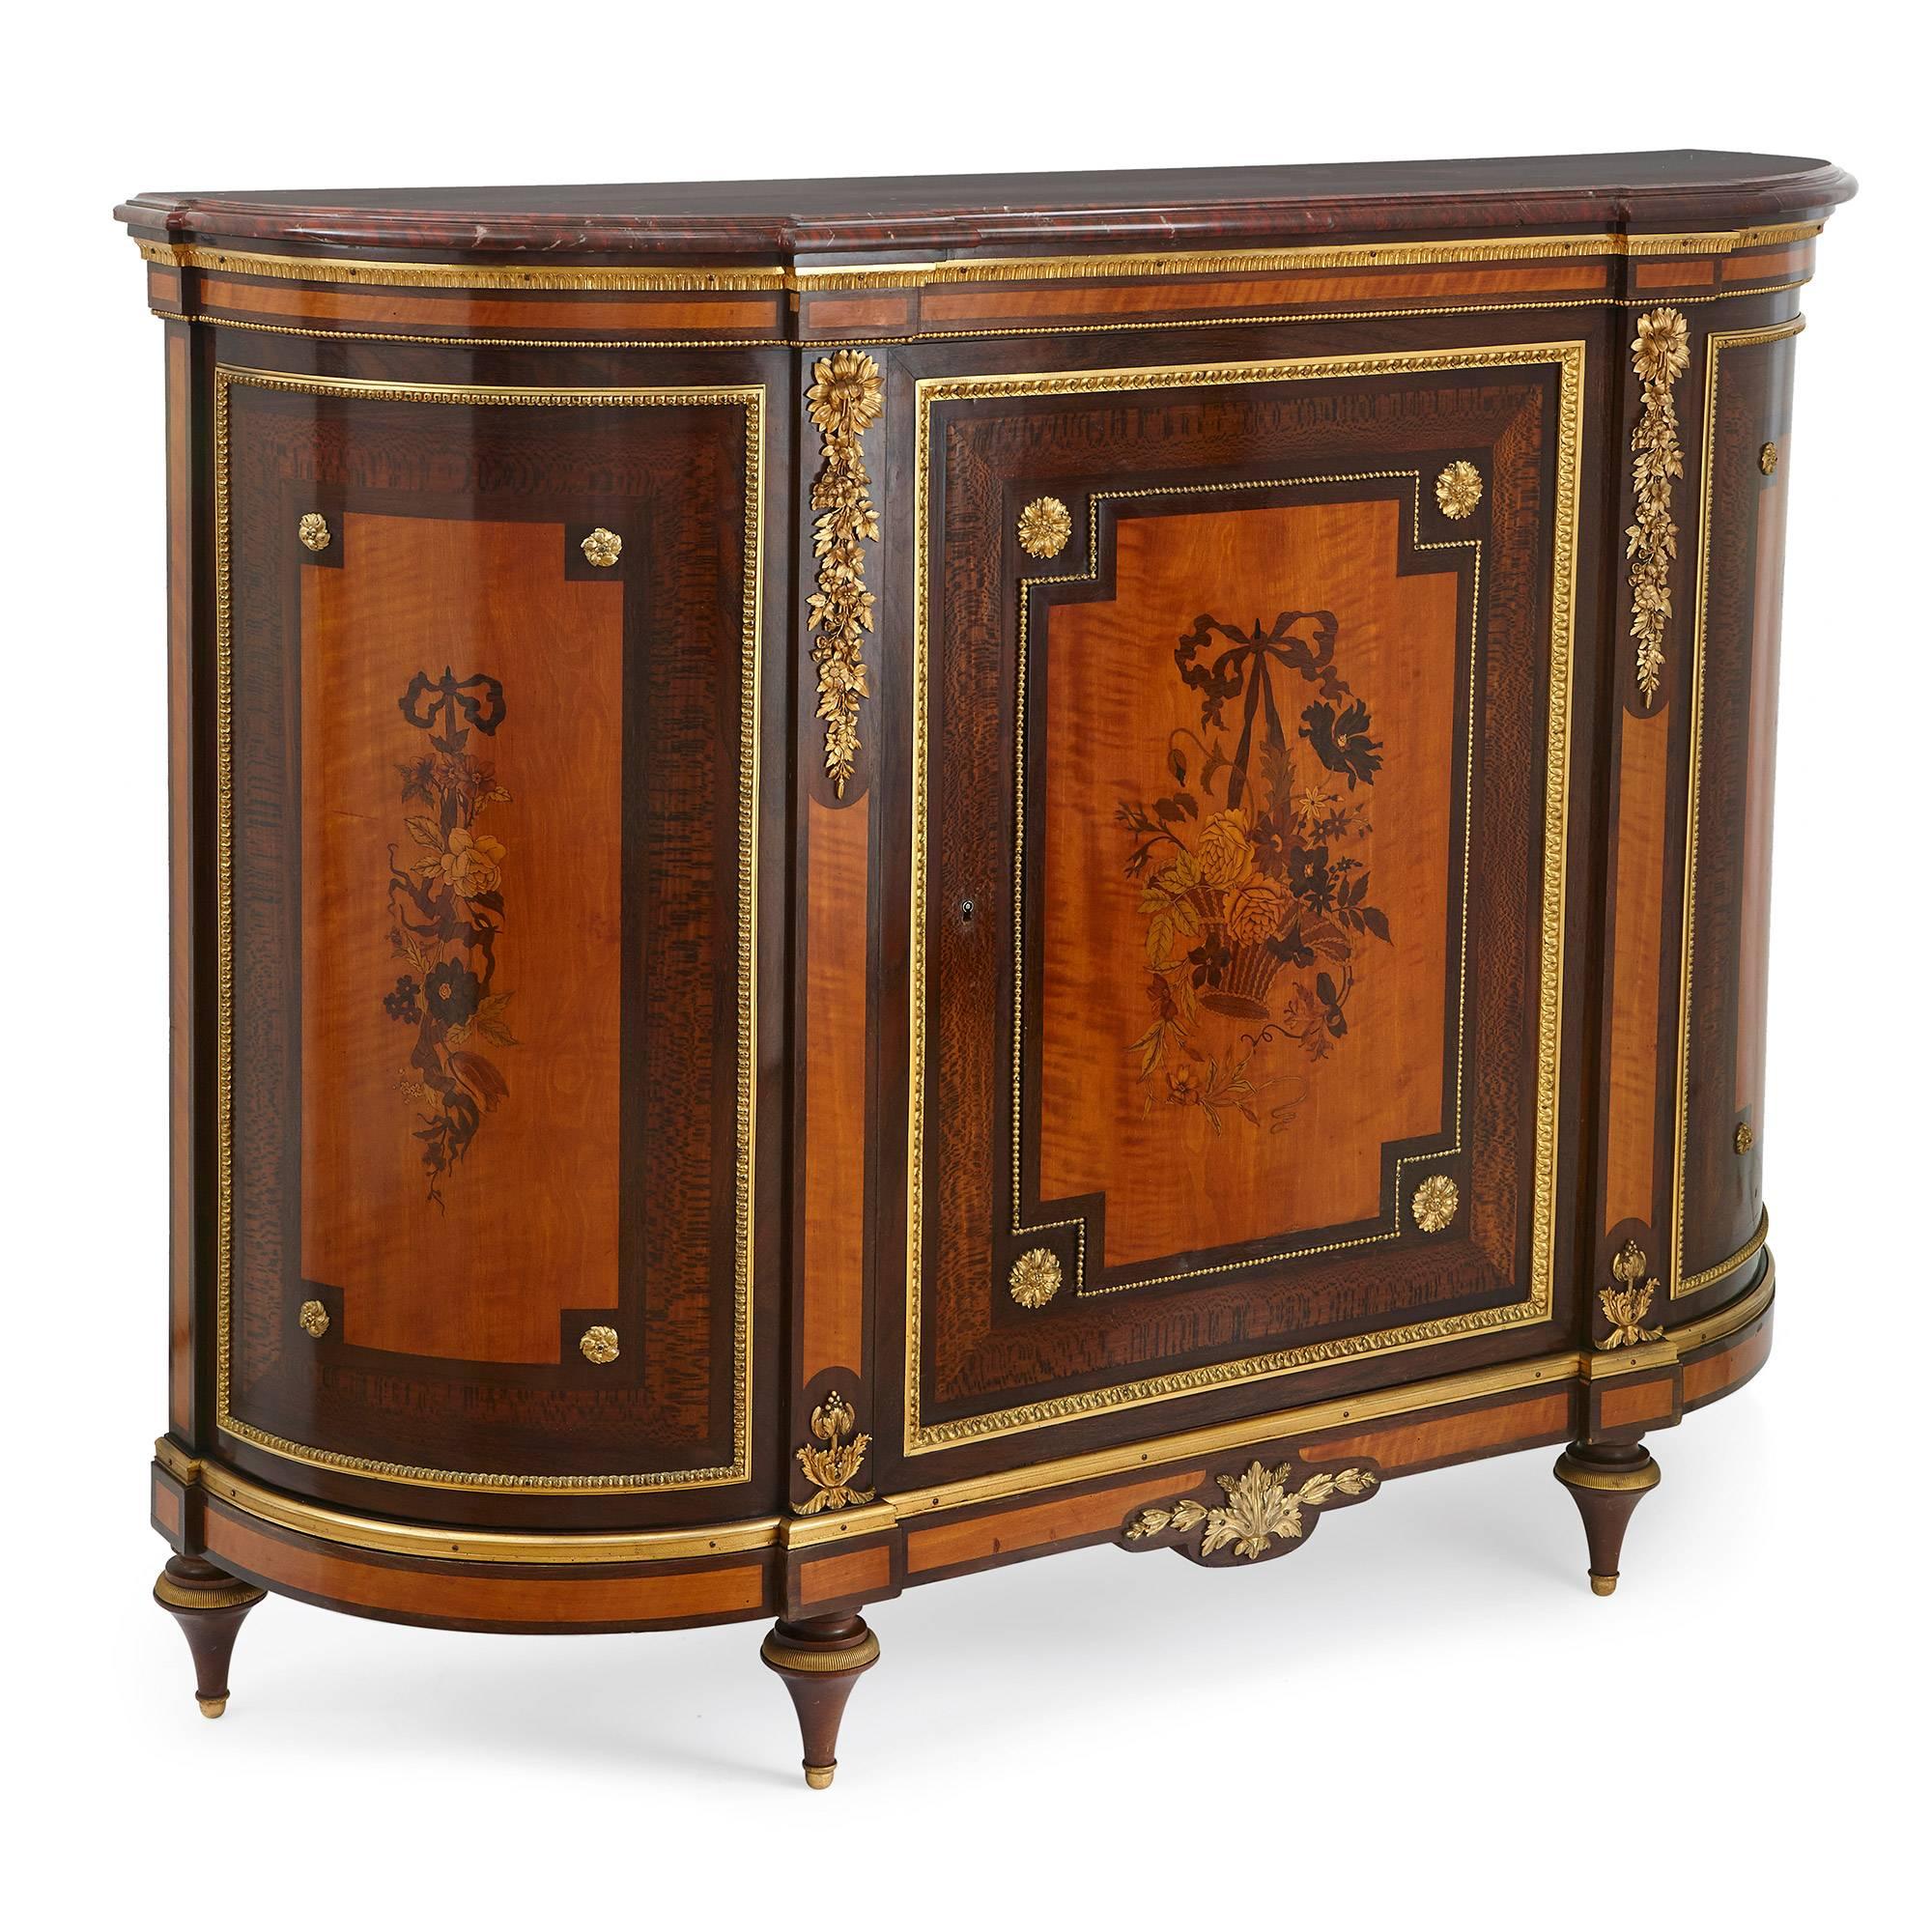 This stunning and elegant cabinet was designed and created by the famed 19th century Parisian ebeniste, Jean-Louis-Benjamin Gros. Featuring detailed inlays, contrasting woods and sumptuous gilt bronze mounts, the cabinet embodies fine craftsmanship